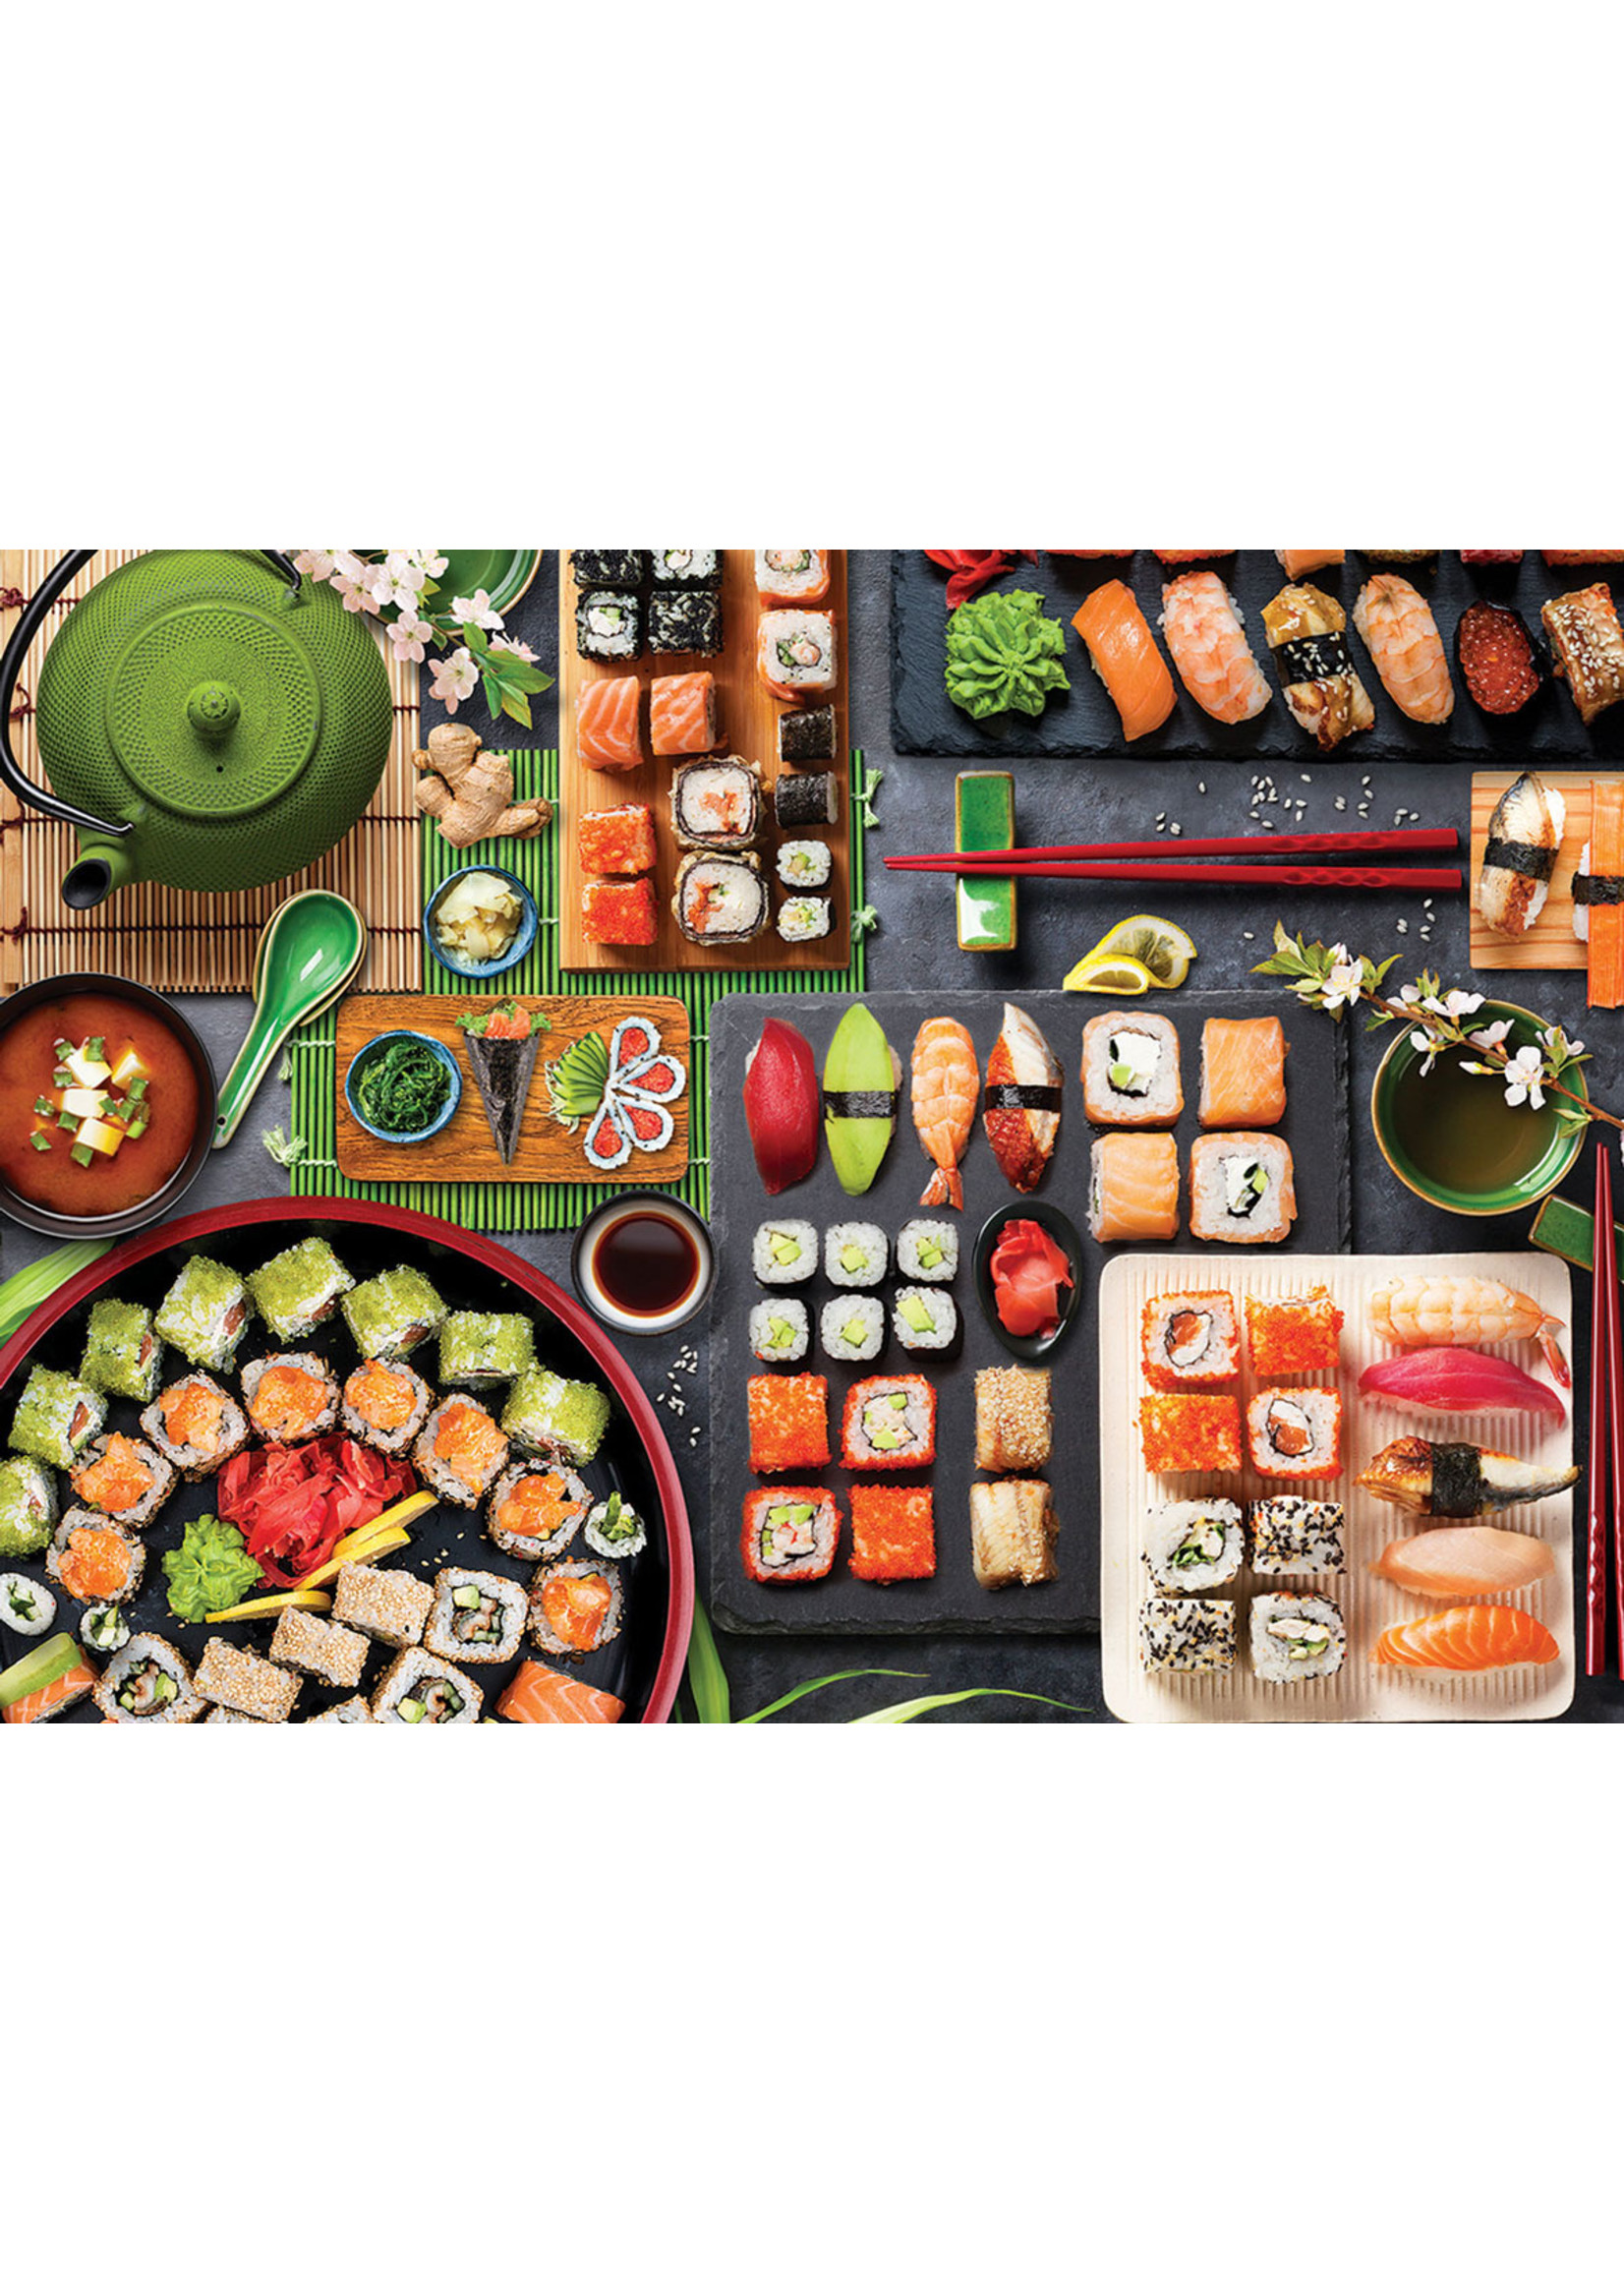 Eurographics Sushi Table - 1000 Piece Puzzle